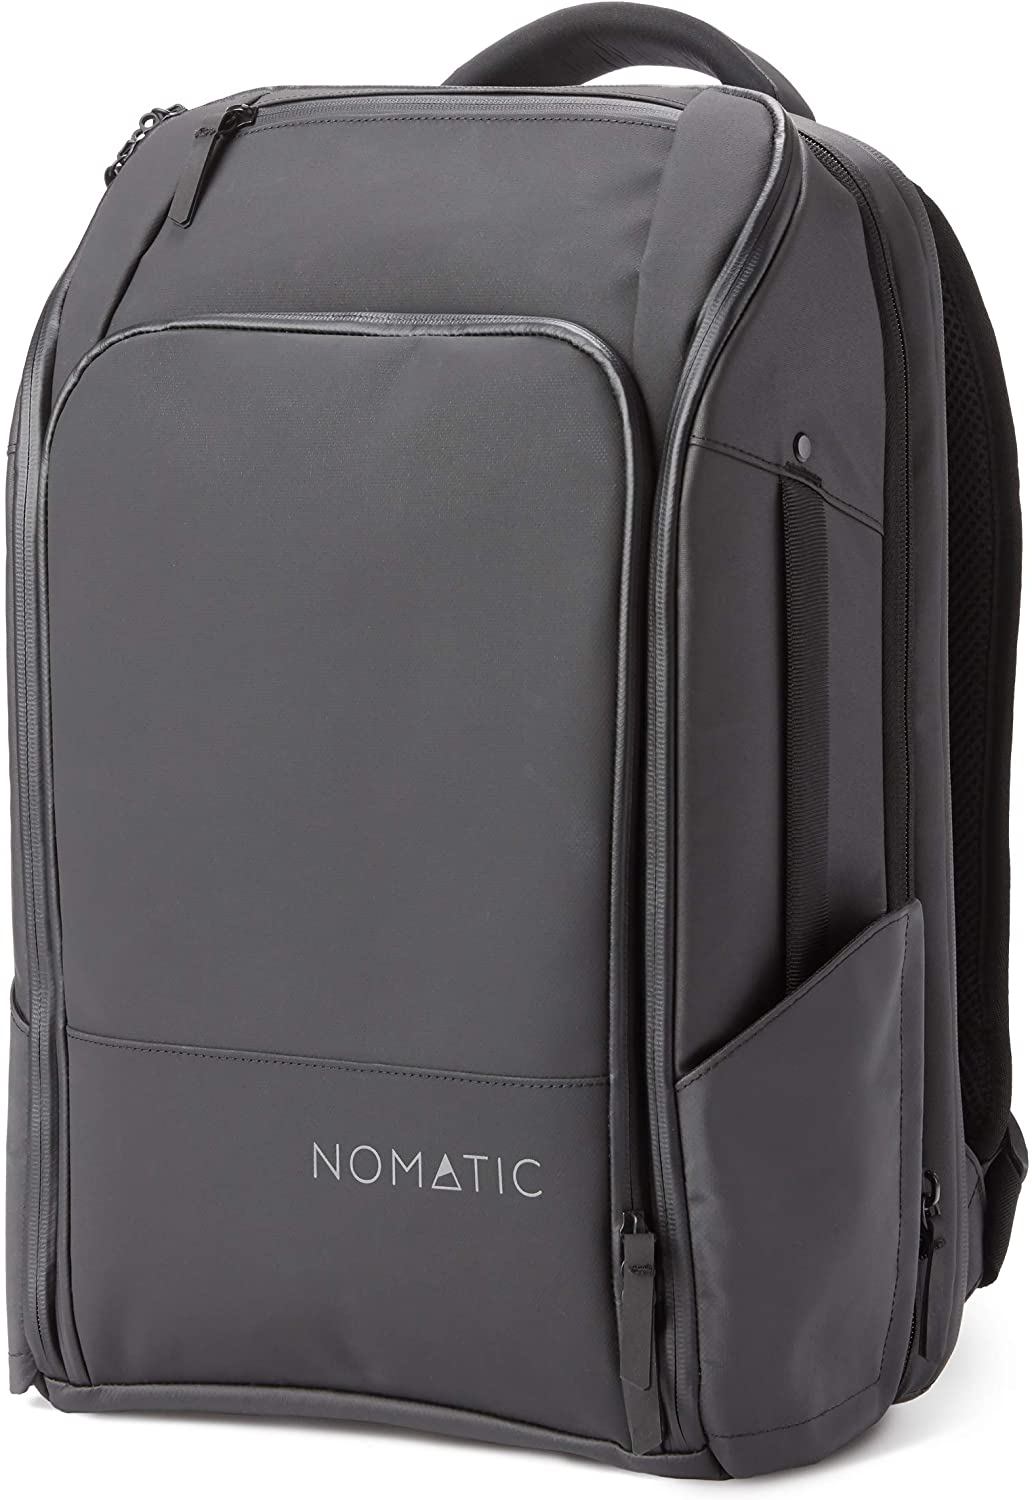 NOMATIC Travel Pack Water Resistant Anti-Theft